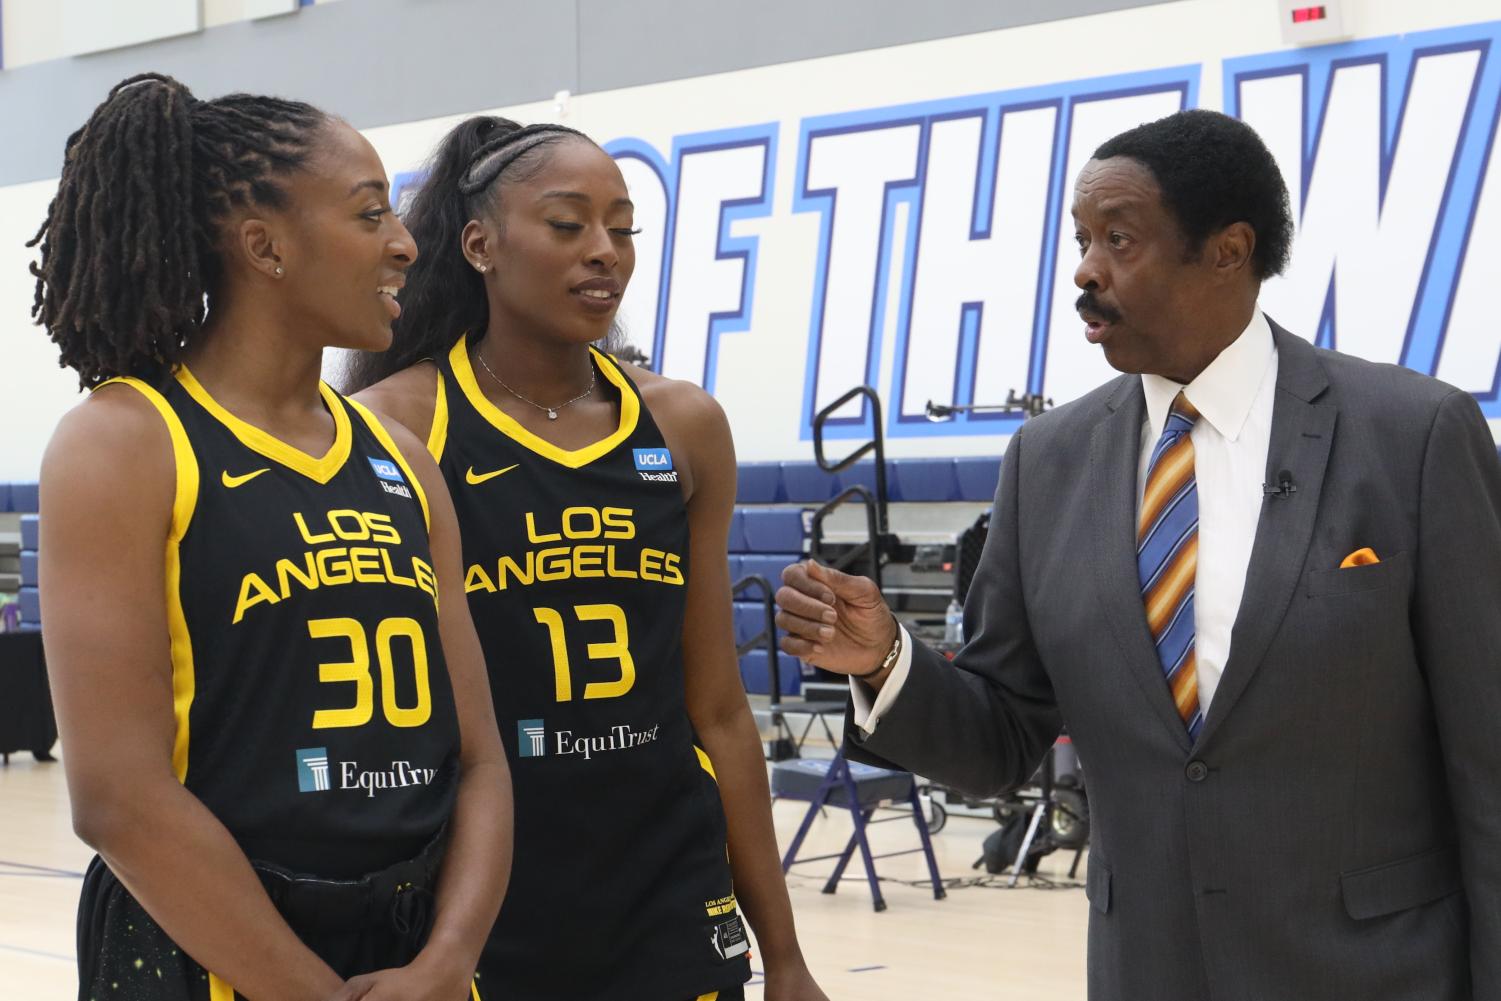 Los Angeles Sparks to call El Camino College home for practices, events -  El Camino College The Union